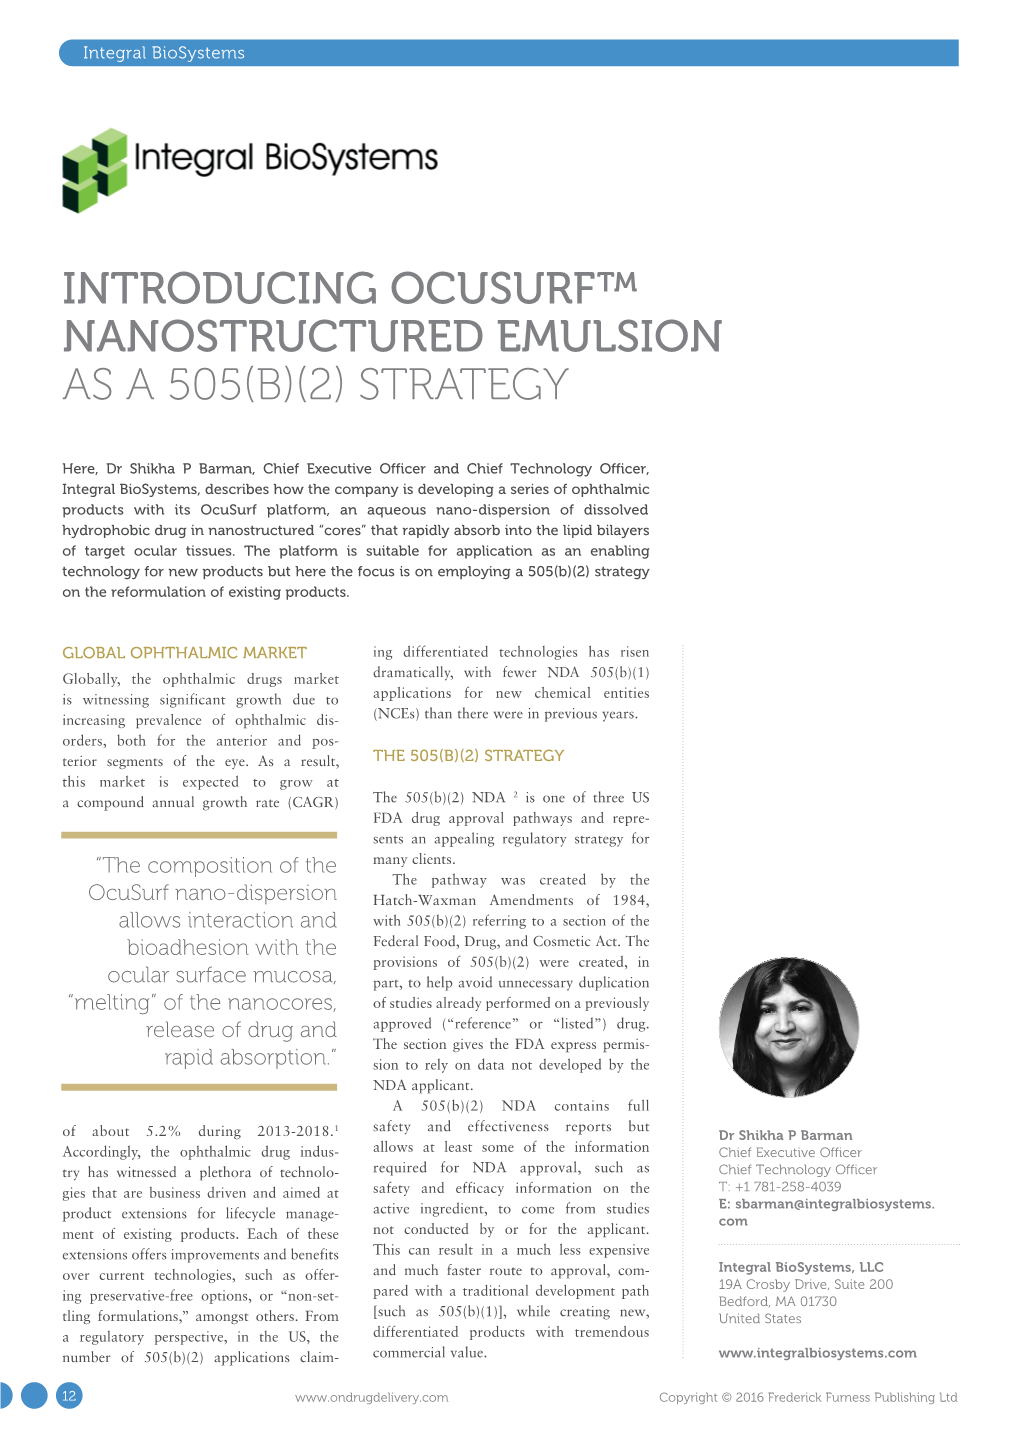 Introducing Ocusurf™ Nanostructured Emulsion As a 505(B)(2) Strategy